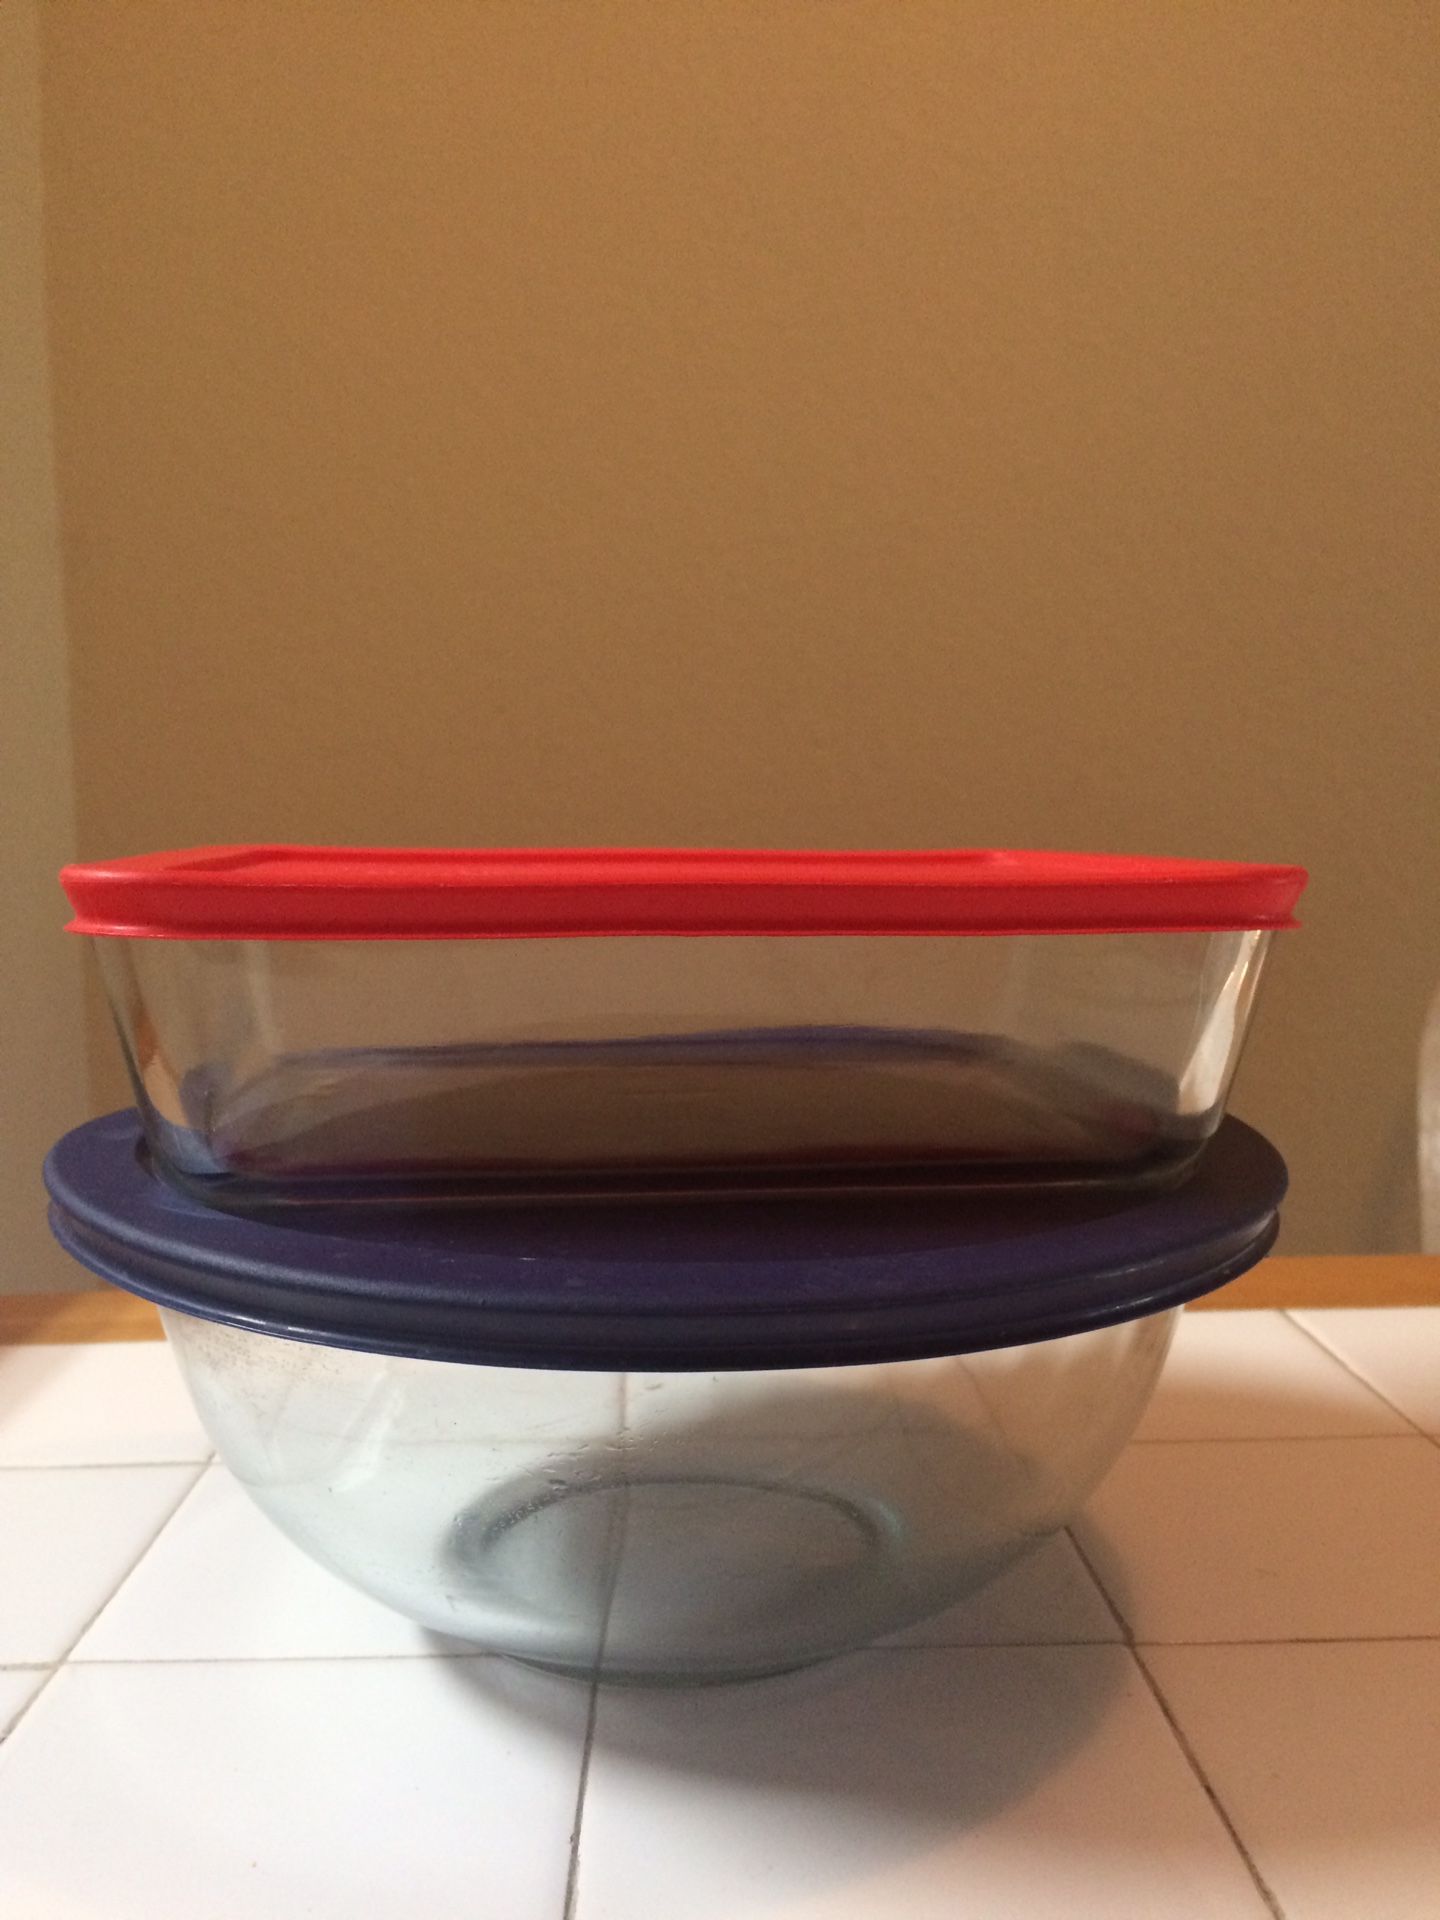 2 Glass Pyrex containers